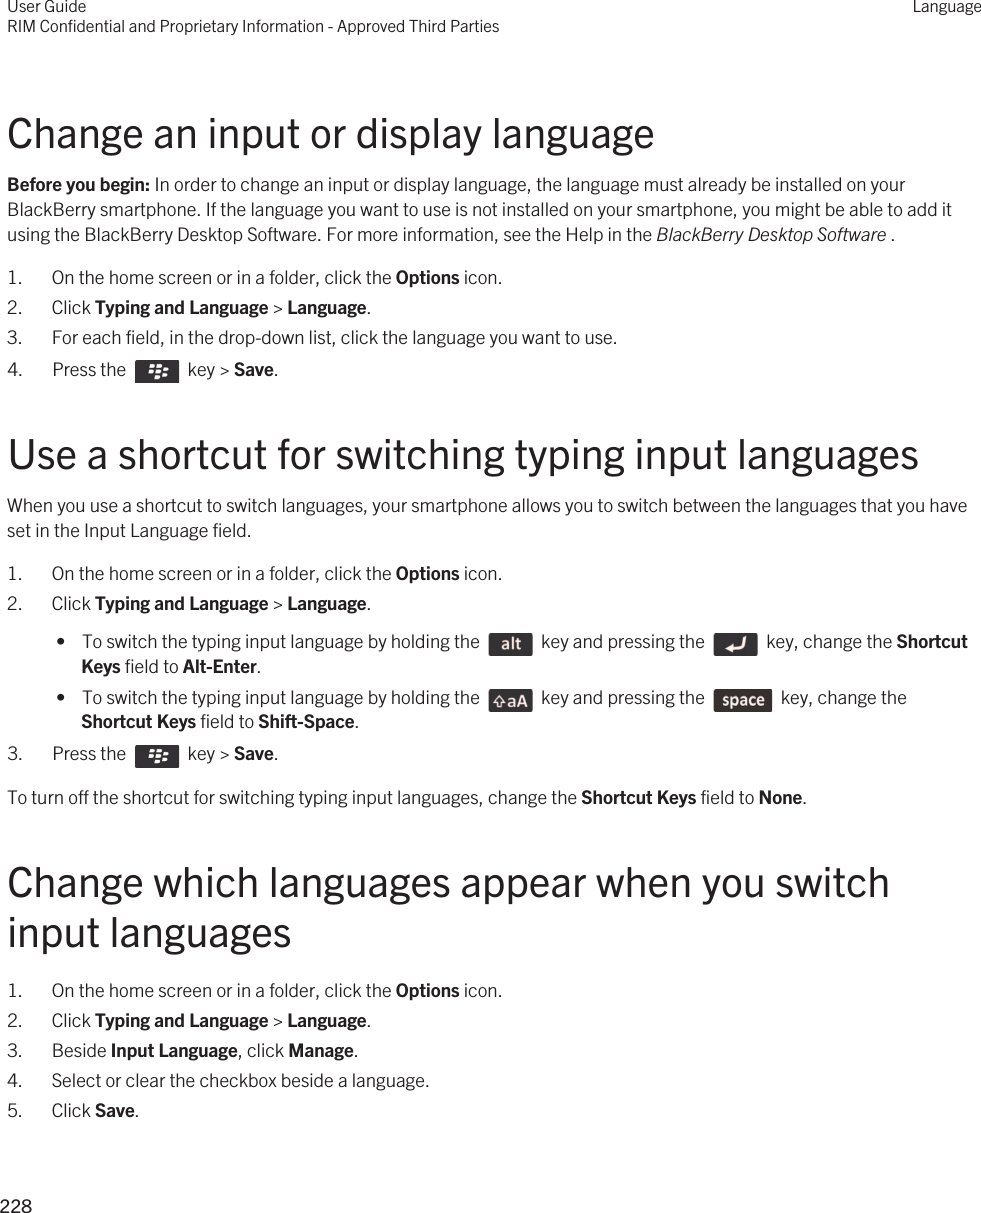 Change an input or display languageBefore you begin: In order to change an input or display language, the language must already be installed on your BlackBerry smartphone. If the language you want to use is not installed on your smartphone, you might be able to add it using the BlackBerry Desktop Software. For more information, see the Help in the BlackBerry Desktop Software .1. On the home screen or in a folder, click the Options icon.2. Click Typing and Language &gt; Language.3. For each field, in the drop-down list, click the language you want to use.4.  Press the    key &gt; Save. Use a shortcut for switching typing input languagesWhen you use a shortcut to switch languages, your smartphone allows you to switch between the languages that you have set in the Input Language field.1. On the home screen or in a folder, click the Options icon.2. Click Typing and Language &gt; Language. •  To switch the typing input language by holding the    key and pressing the    key, change the Shortcut Keys field to Alt-Enter. •  To switch the typing input language by holding the    key and pressing the    key, change the Shortcut Keys field to Shift-Space.3.  Press the    key &gt; Save. To turn off the shortcut for switching typing input languages, change the Shortcut Keys field to None.Change which languages appear when you switch input languages1. On the home screen or in a folder, click the Options icon.2. Click Typing and Language &gt; Language.3. Beside Input Language, click Manage.4. Select or clear the checkbox beside a language.5. Click Save.User GuideRIM Confidential and Proprietary Information - Approved Third PartiesLanguage228 